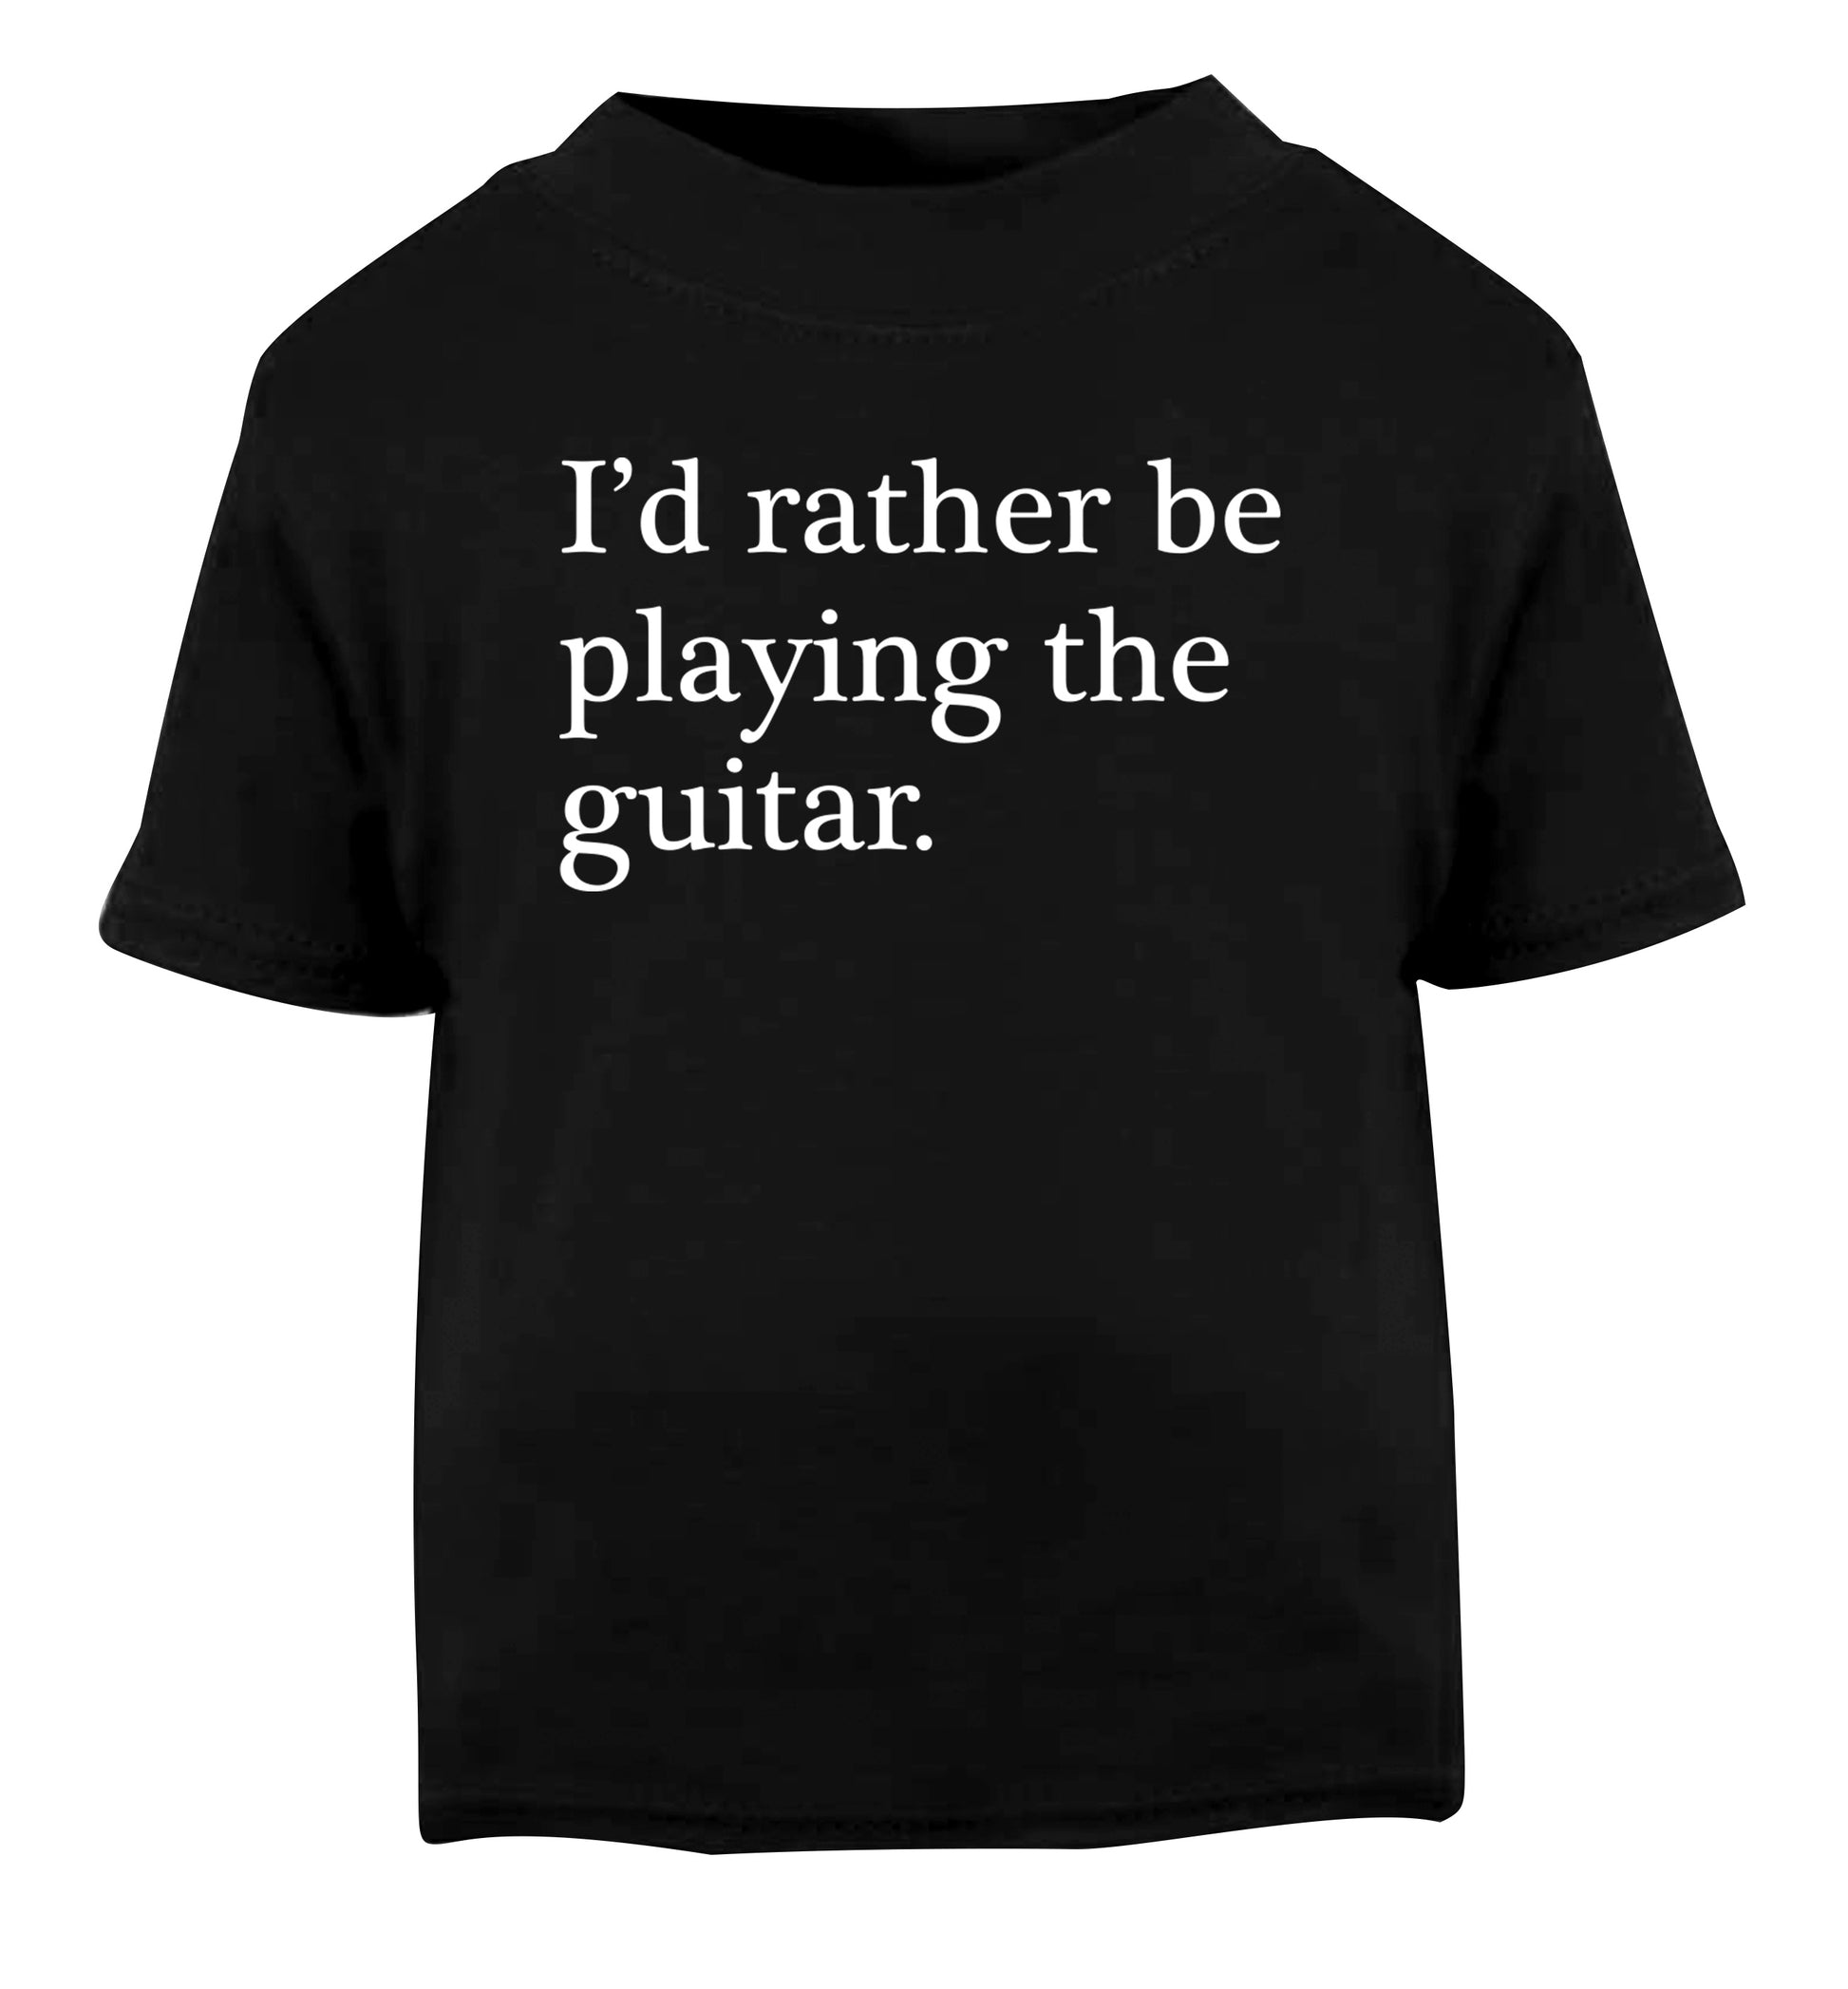 I'd rather be playing the guitar Black Baby Toddler Tshirt 2 years